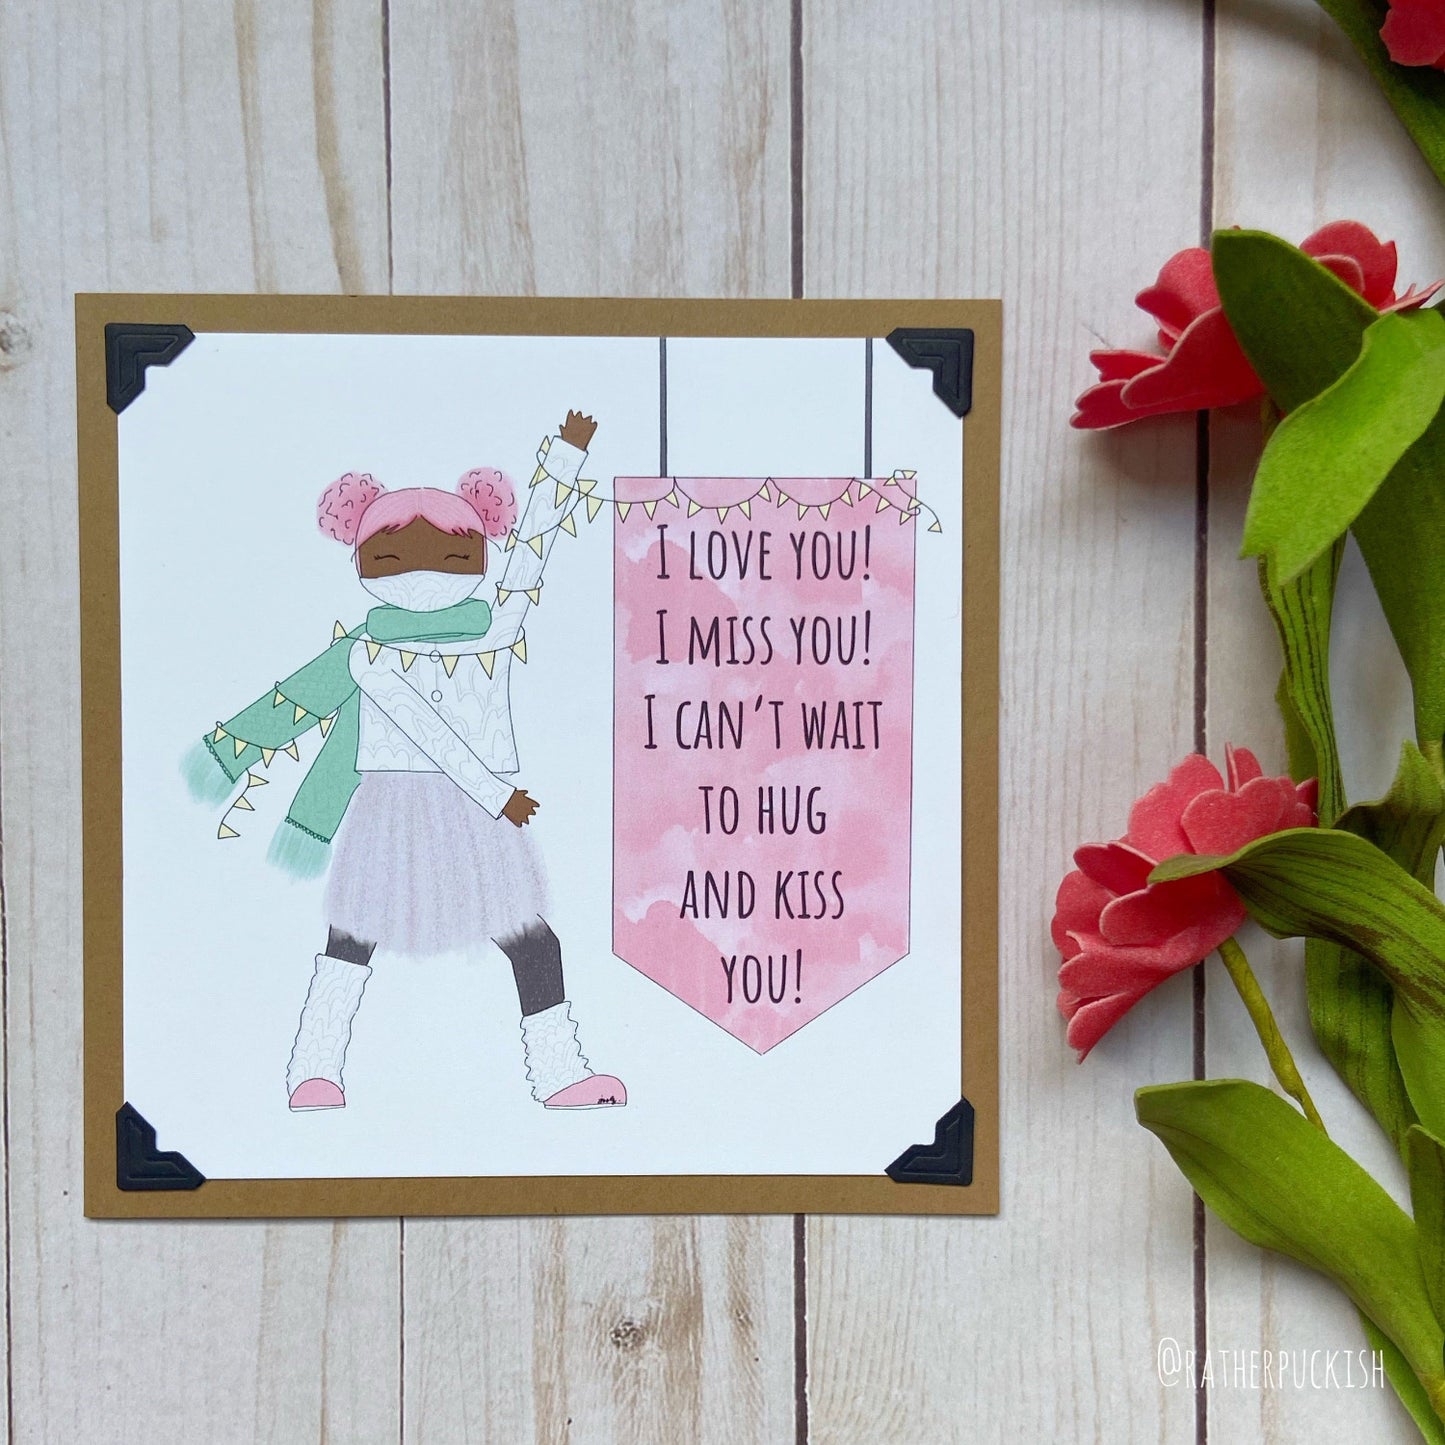 I love you! I miss you! Note Card